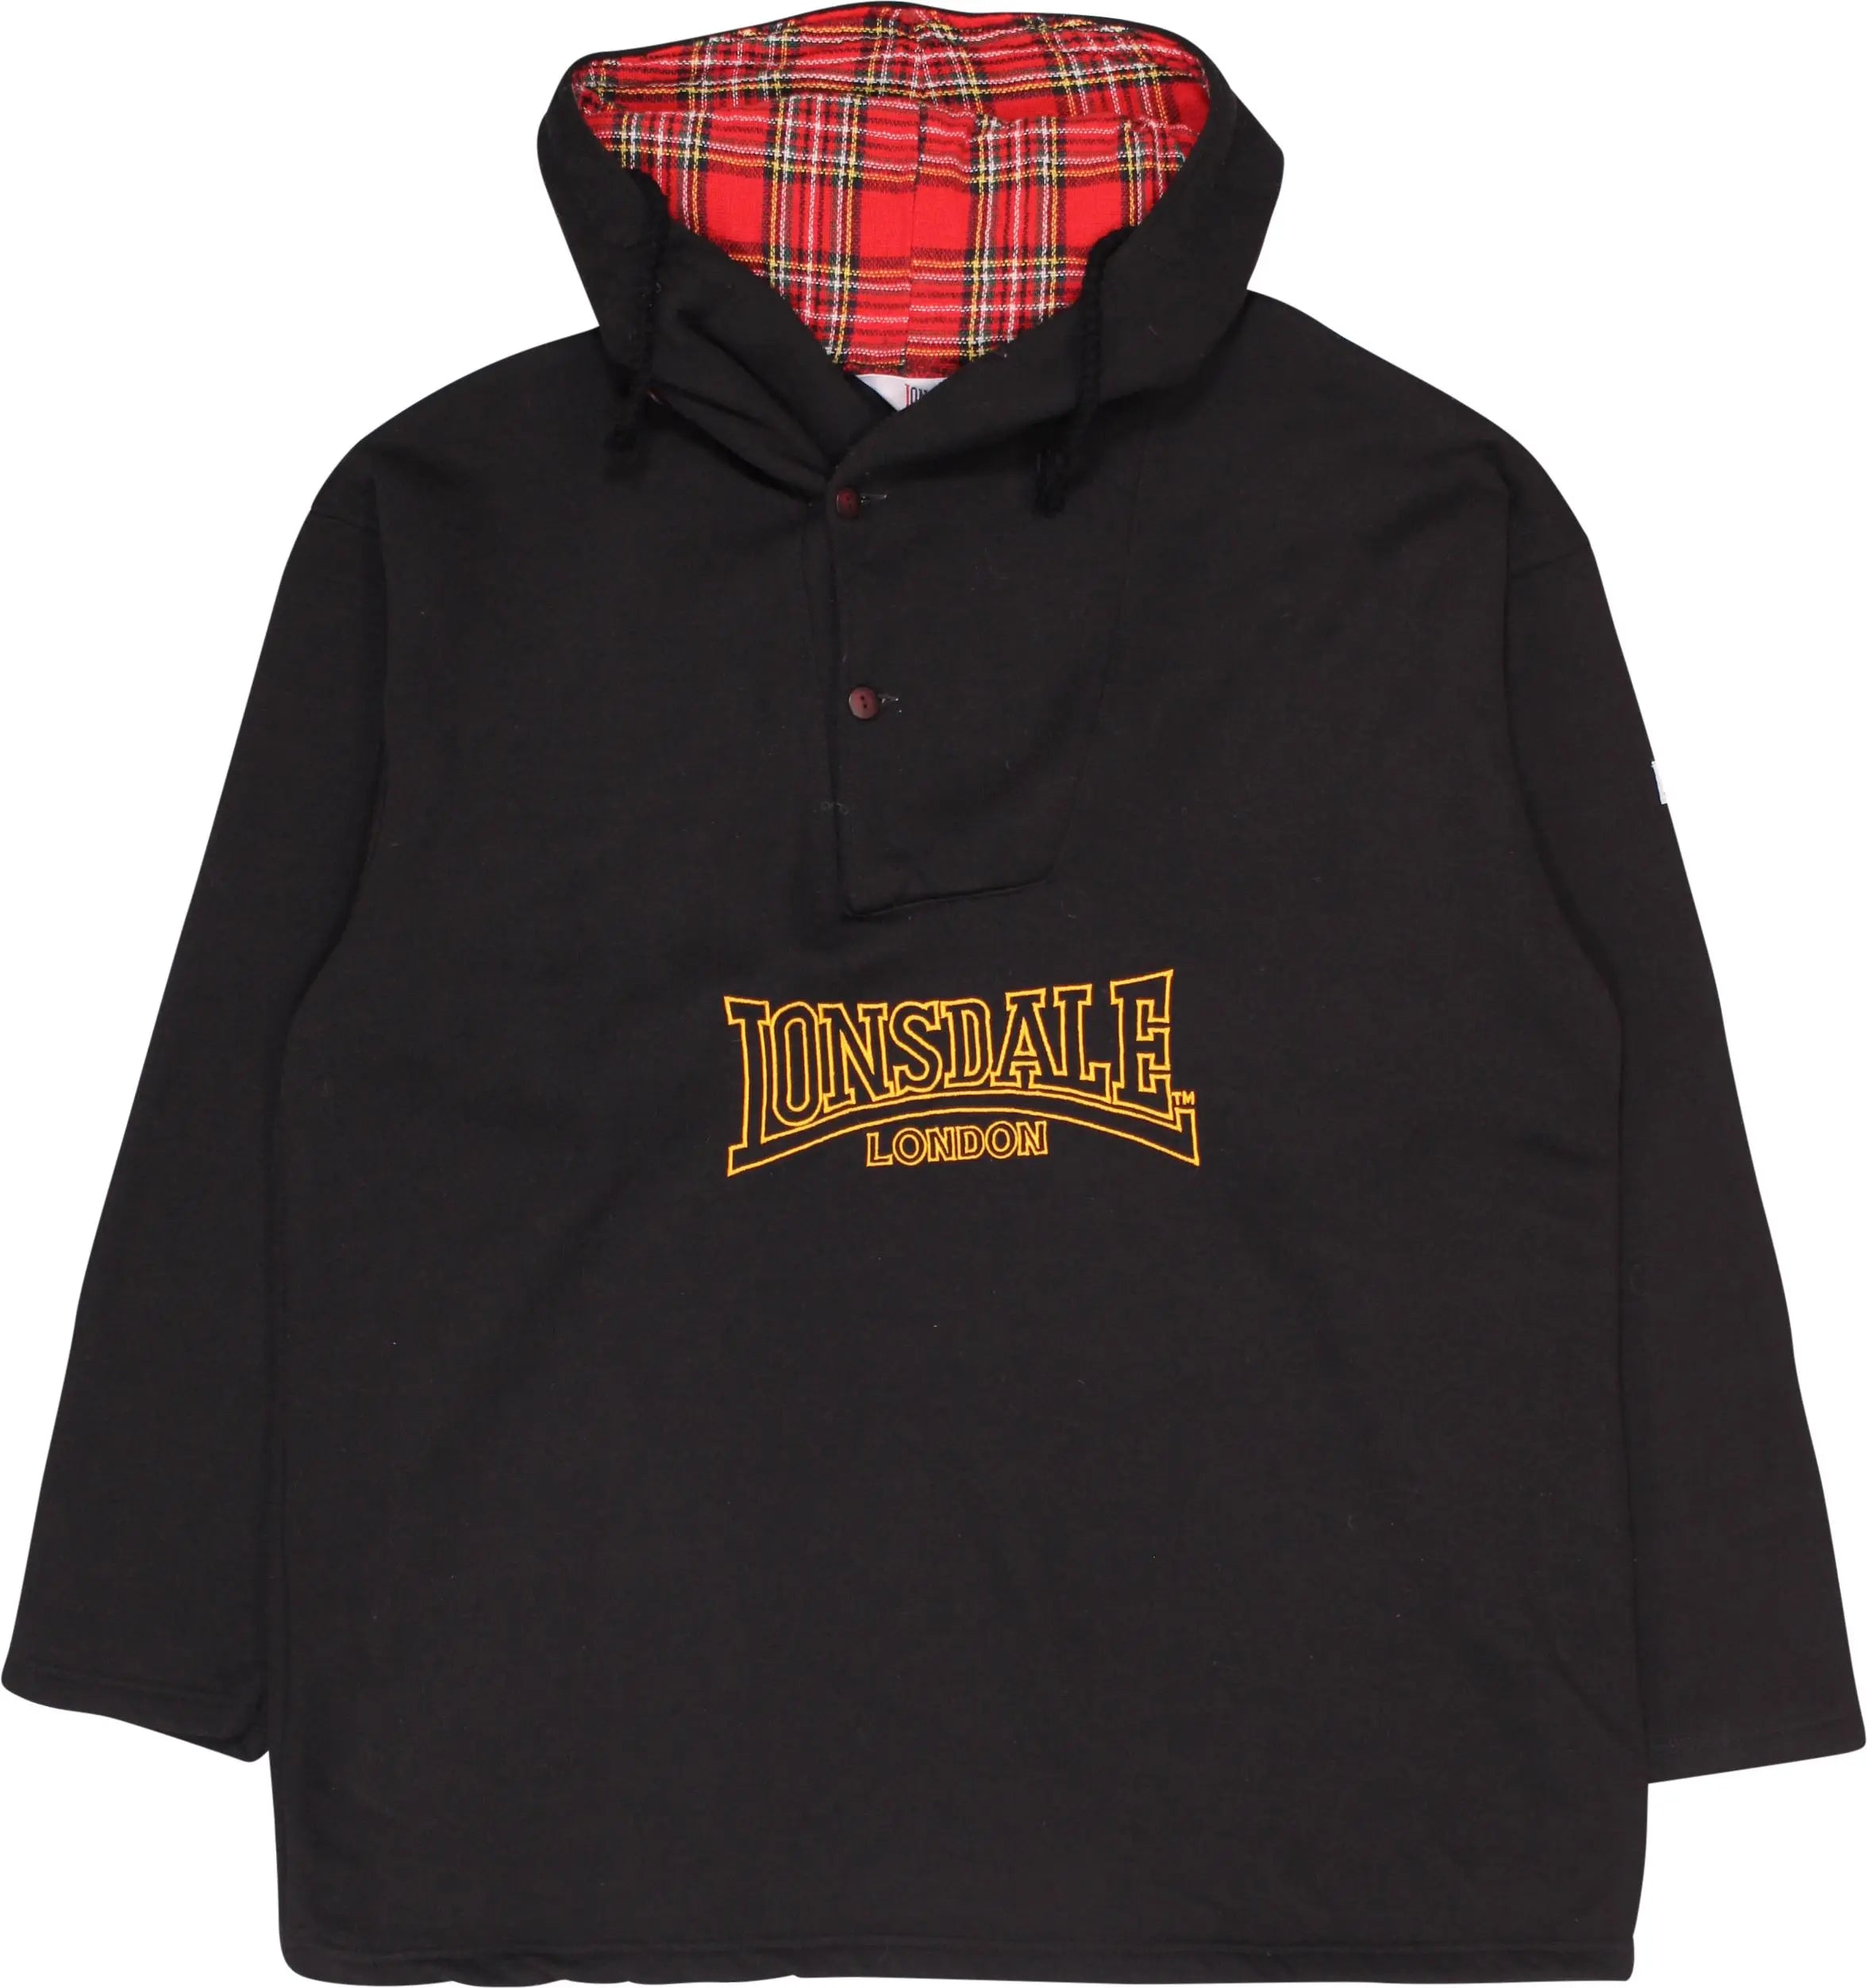 Lonsdale - Hoodie by Lonsdale- ThriftTale.com - Vintage and second handclothing